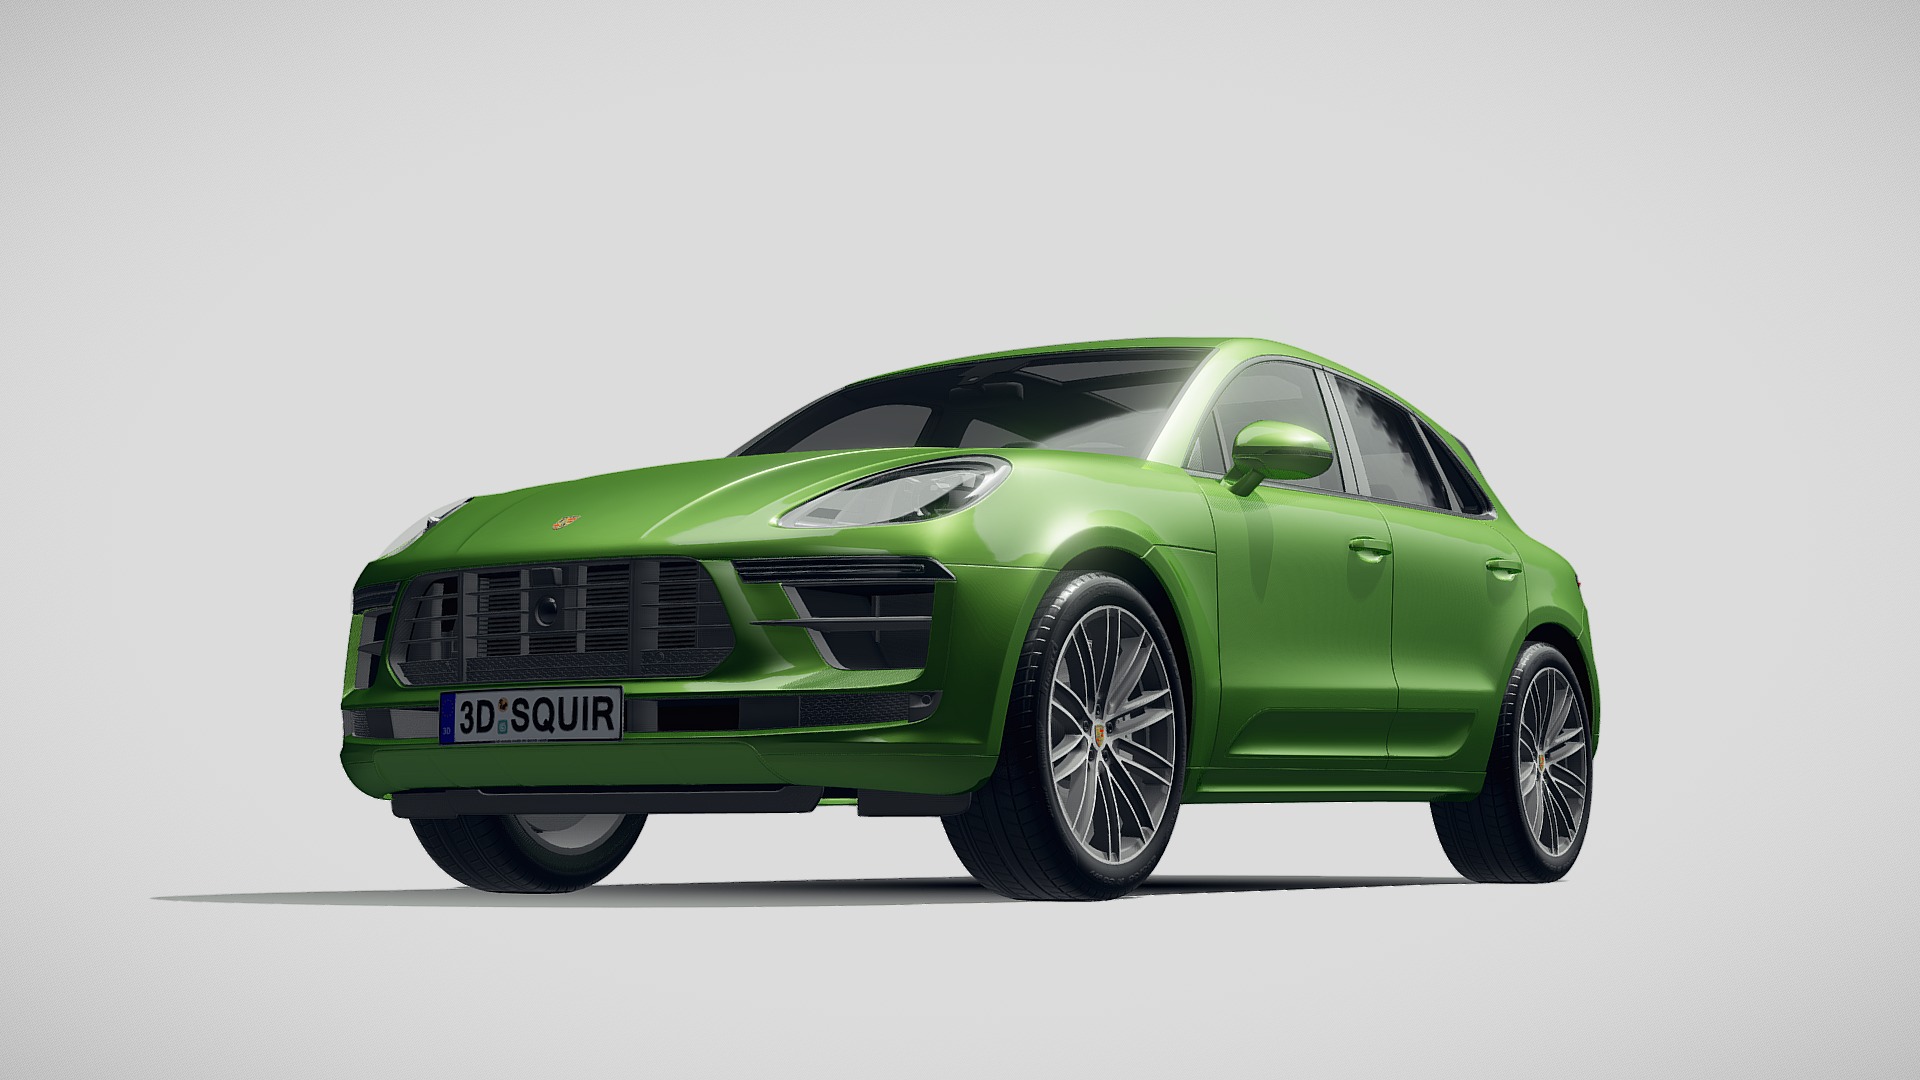 3D model Porsche Macan Turbo 2019 - This is a 3D model of the Porsche Macan Turbo 2019. The 3D model is about a green car with a white background.